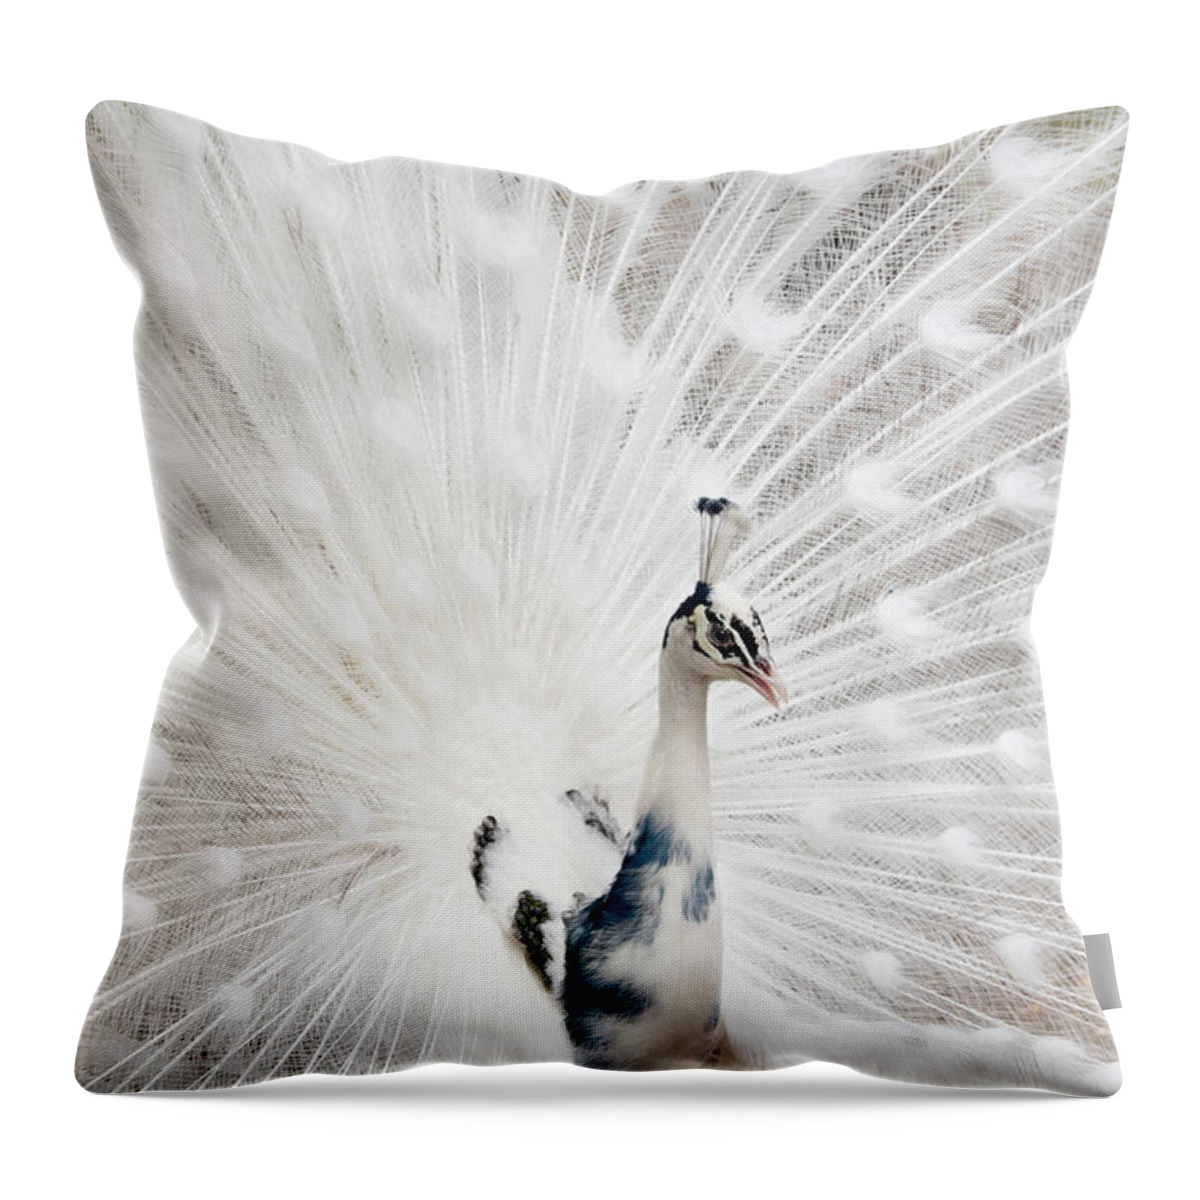 White Peacock Throw Pillow featuring the photograph Beautiful White Peacock by Louise Tanguay